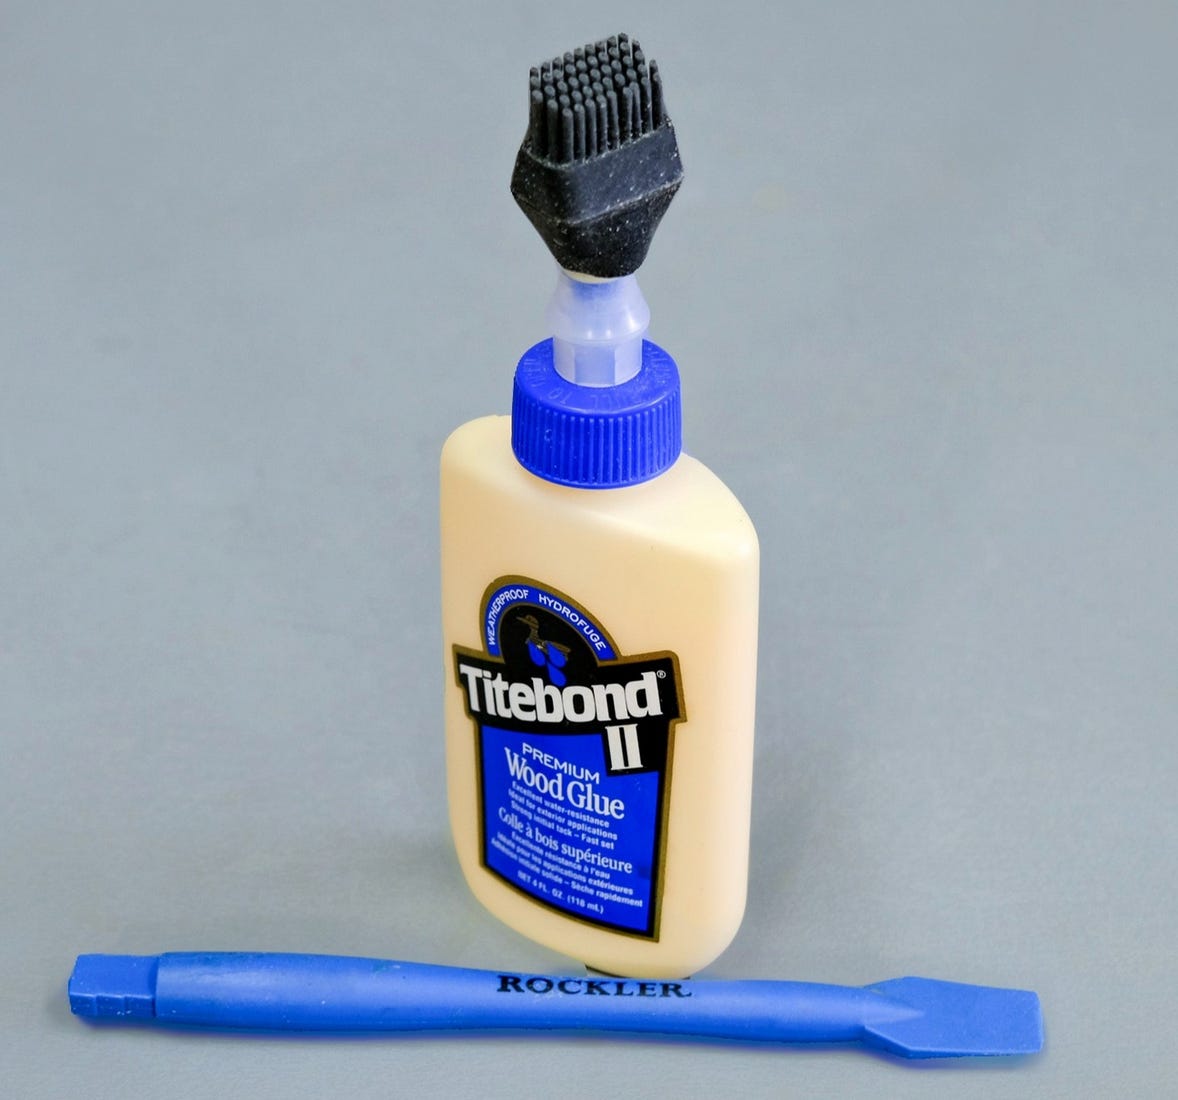 Rockler Silicone Glue Brush Review